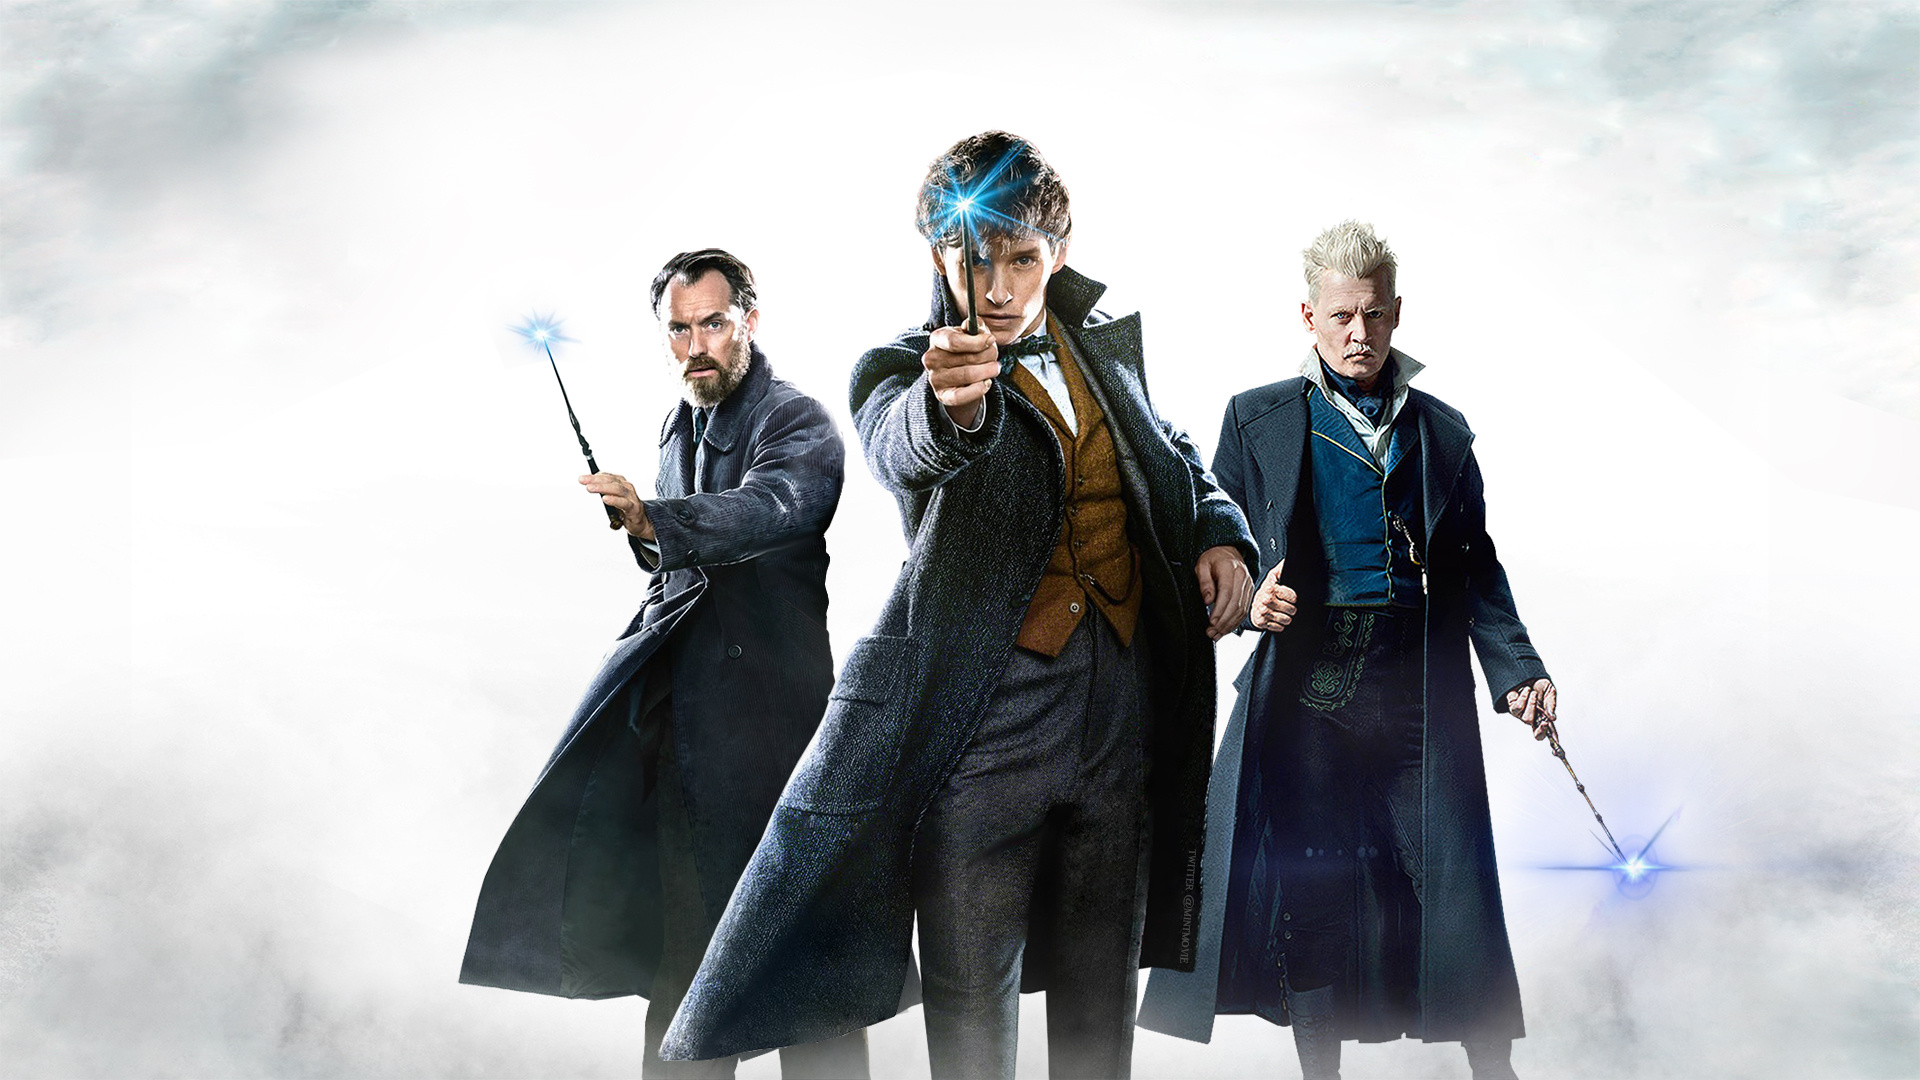 Crimes of Grindelwald, Fantastic Beasts movies, Top backgrounds, Free wallpapers, 1920x1080 Full HD Desktop